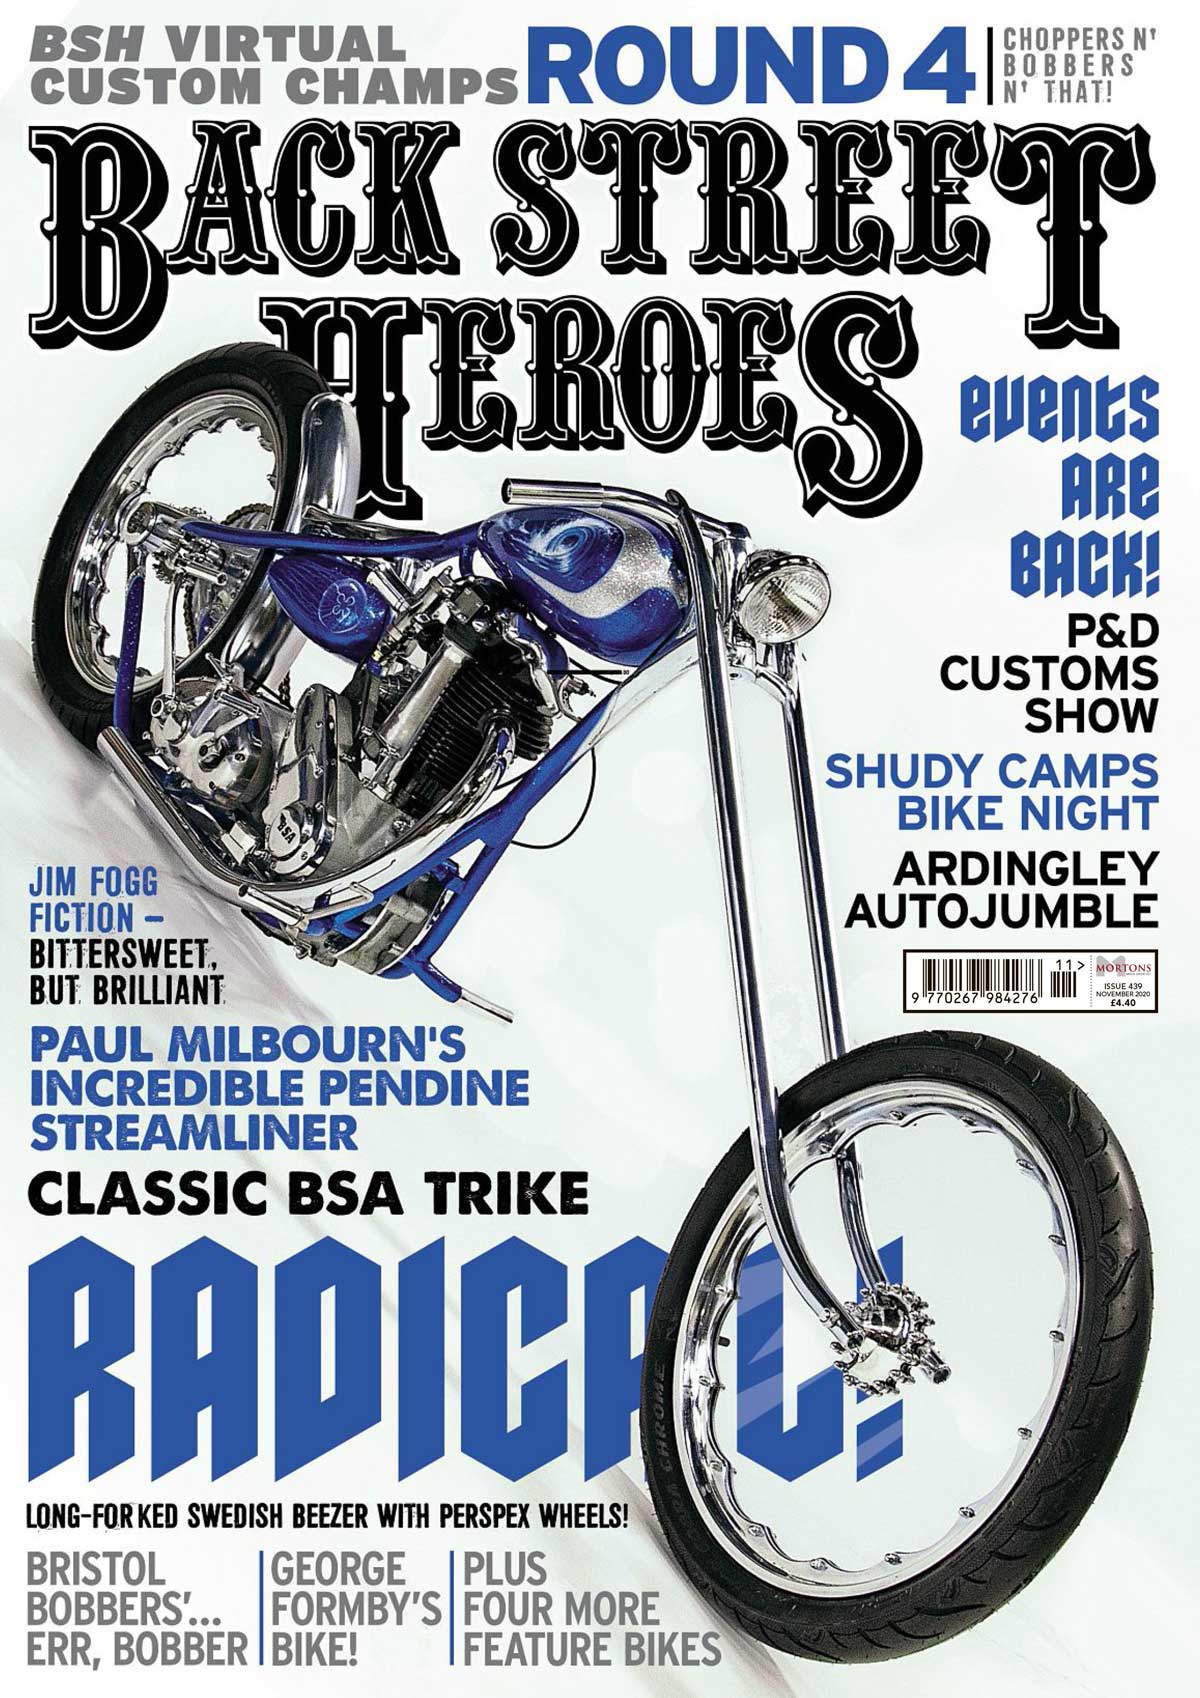 PREVIEW: November issue of Back Street Heroes